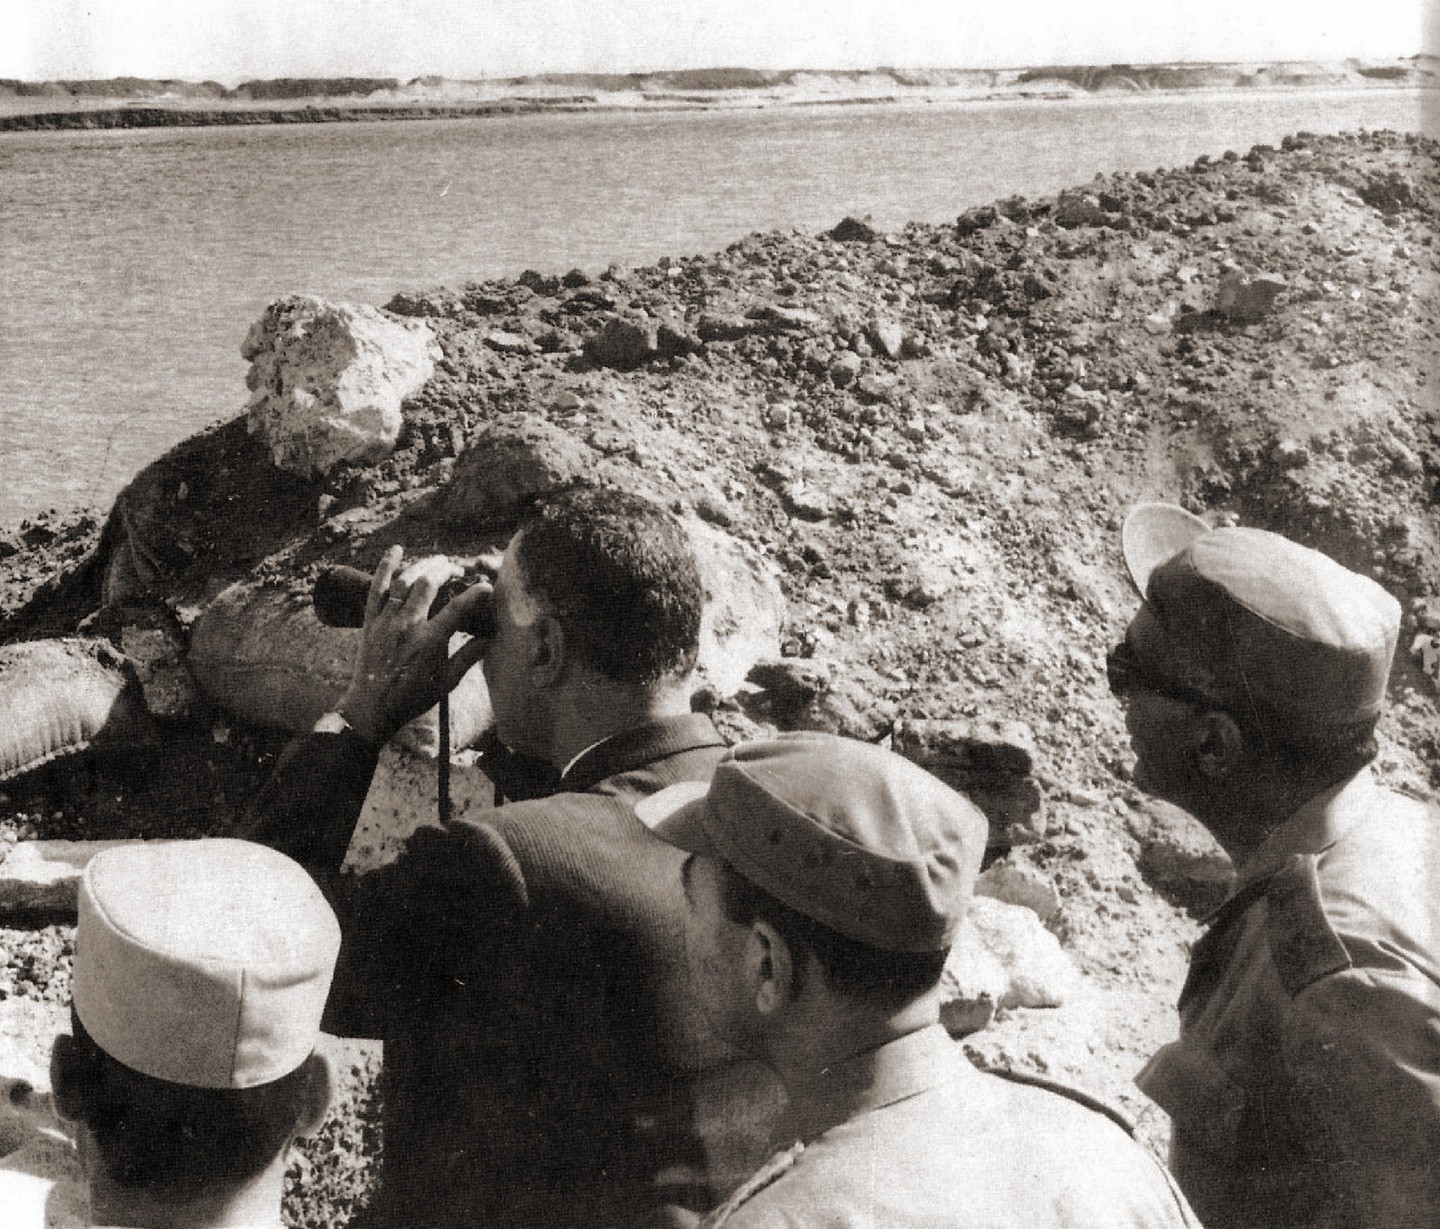 President_Nasser's_visit_to_the_Suez_front_with_Egypt's_top_military_commanders_during_the_War_of_Attrition.jpg